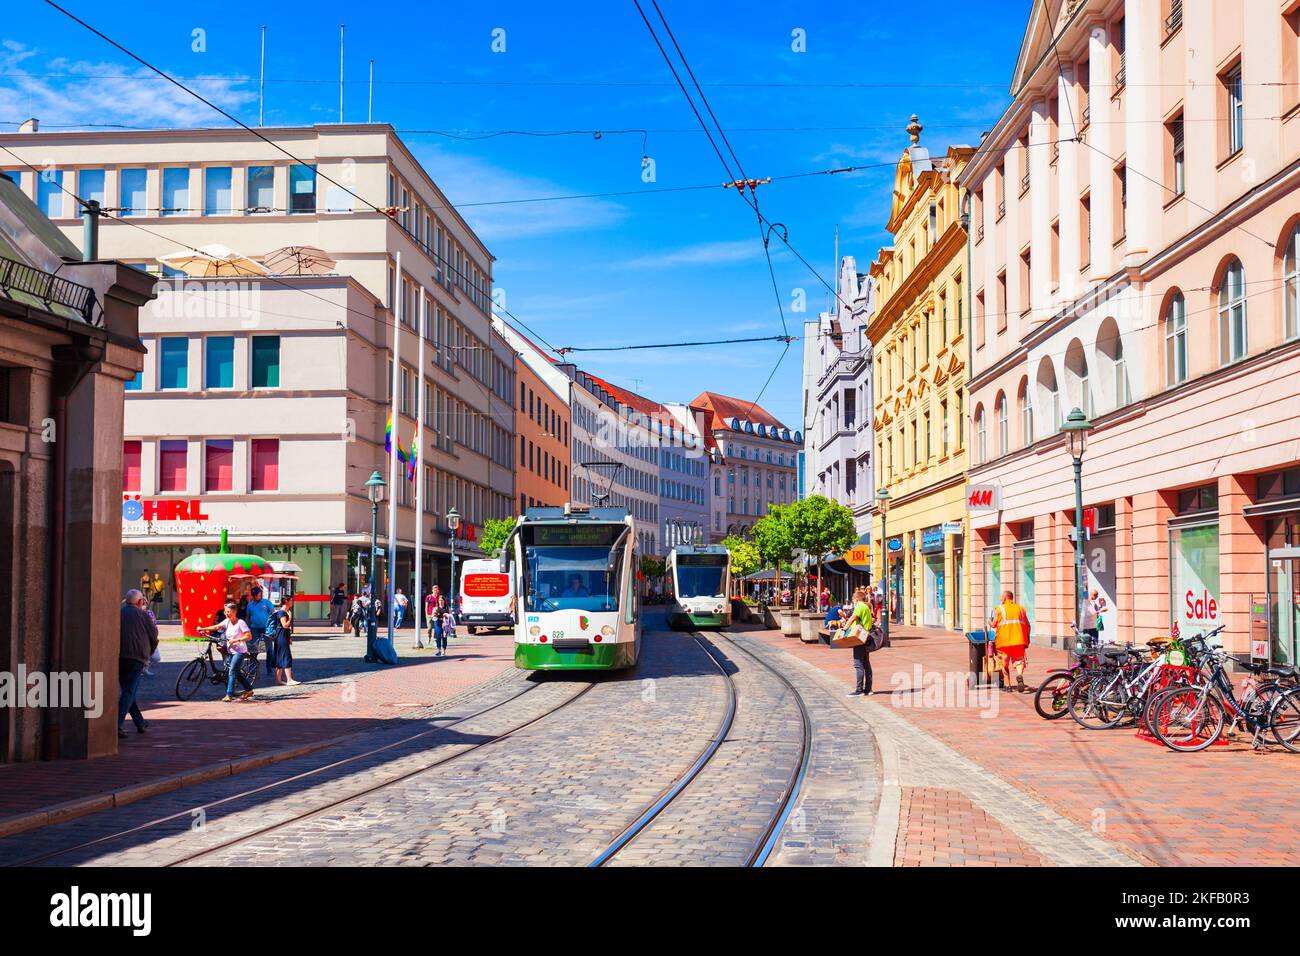 Augsburg, Germany - July 06, 2021: Trams in the city center at Moritzplatz square in Augsburg city, Germany Stock Photo